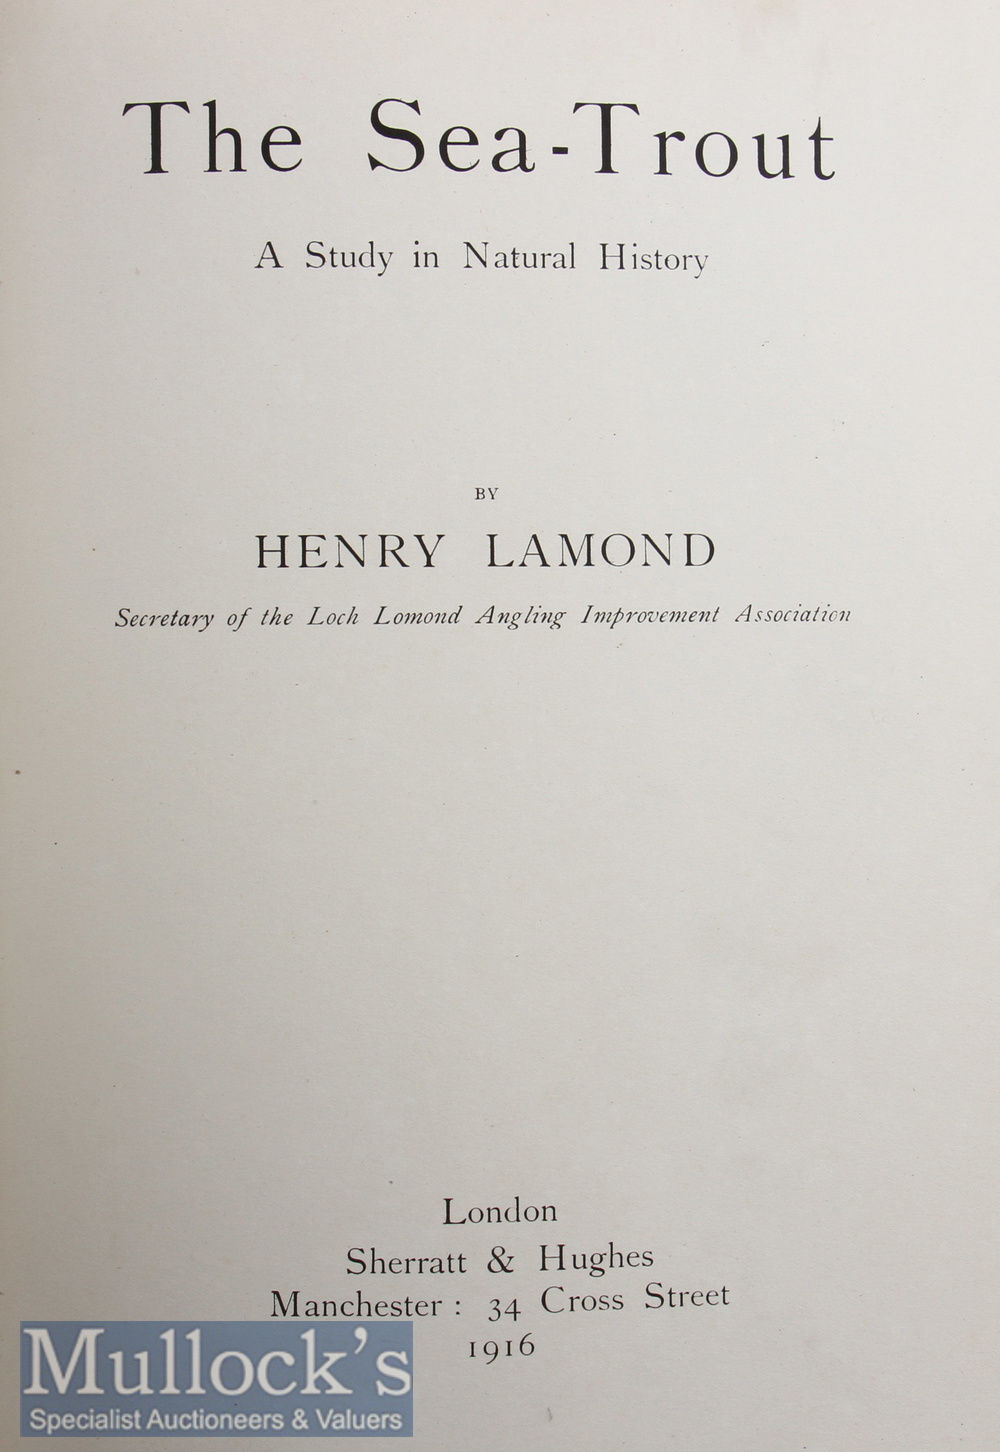 Lamond, Henry – The Sea-Trout, a Study in Natural History, 1916 1st edition, coloured frontis of a - Image 2 of 3